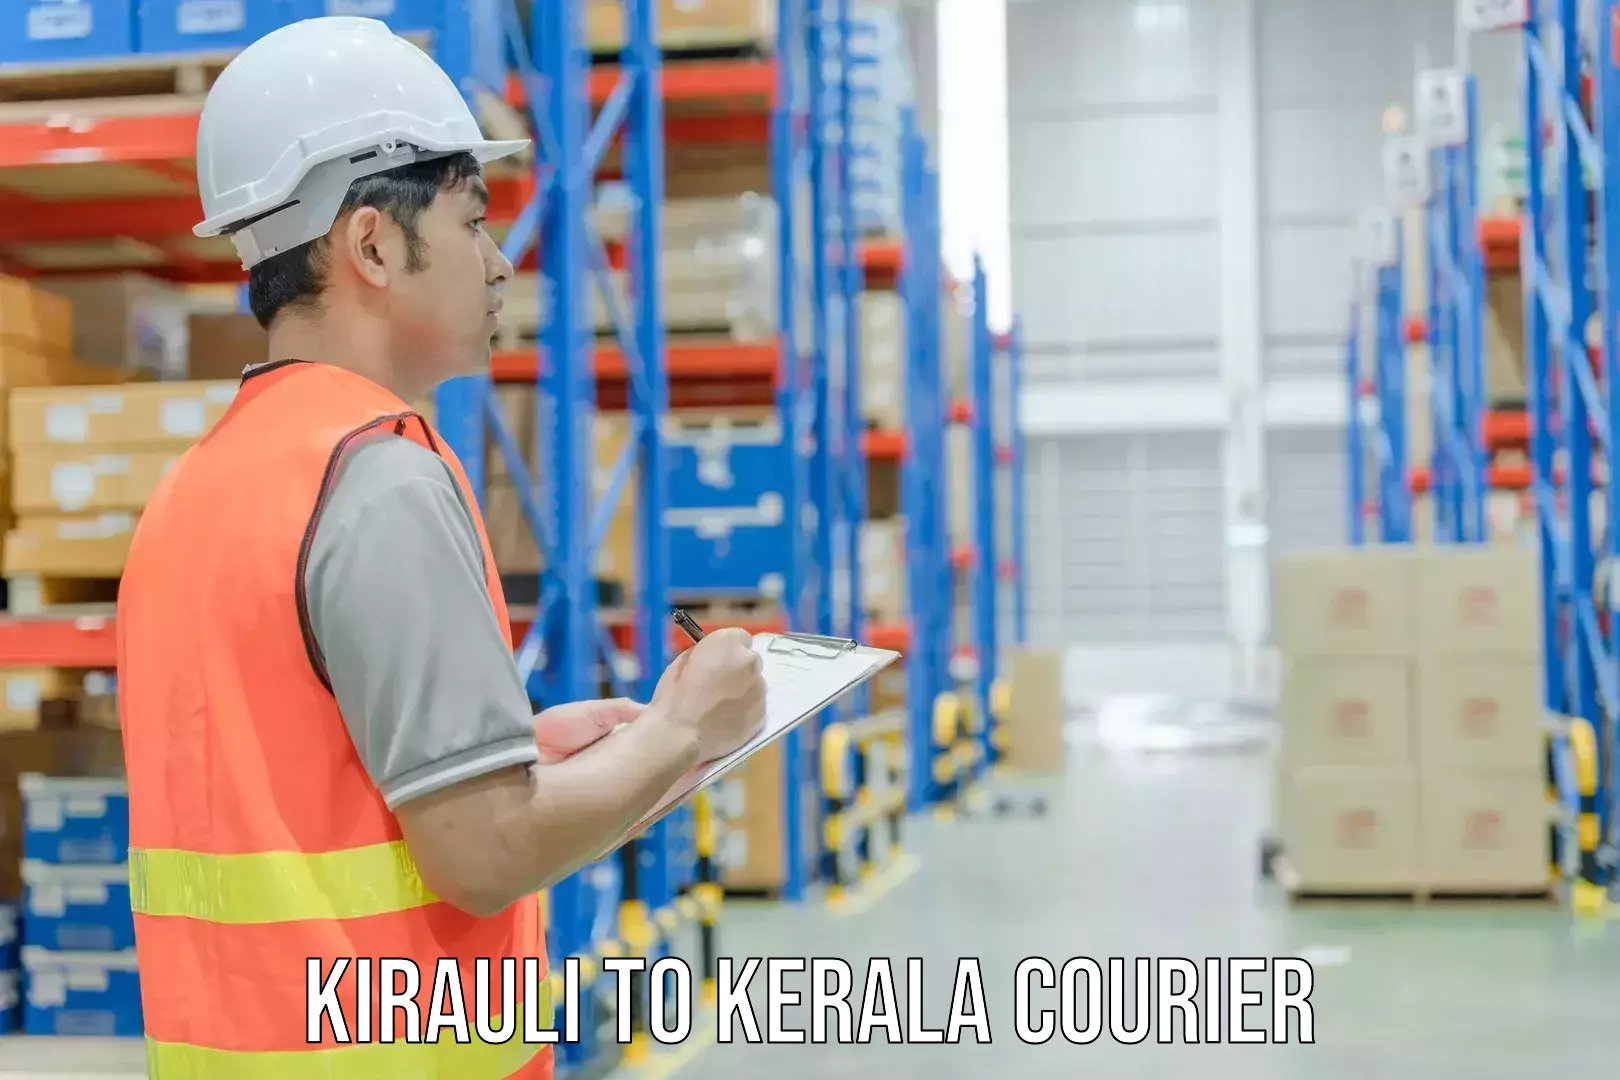 24/7 courier service Kirauli to Agali